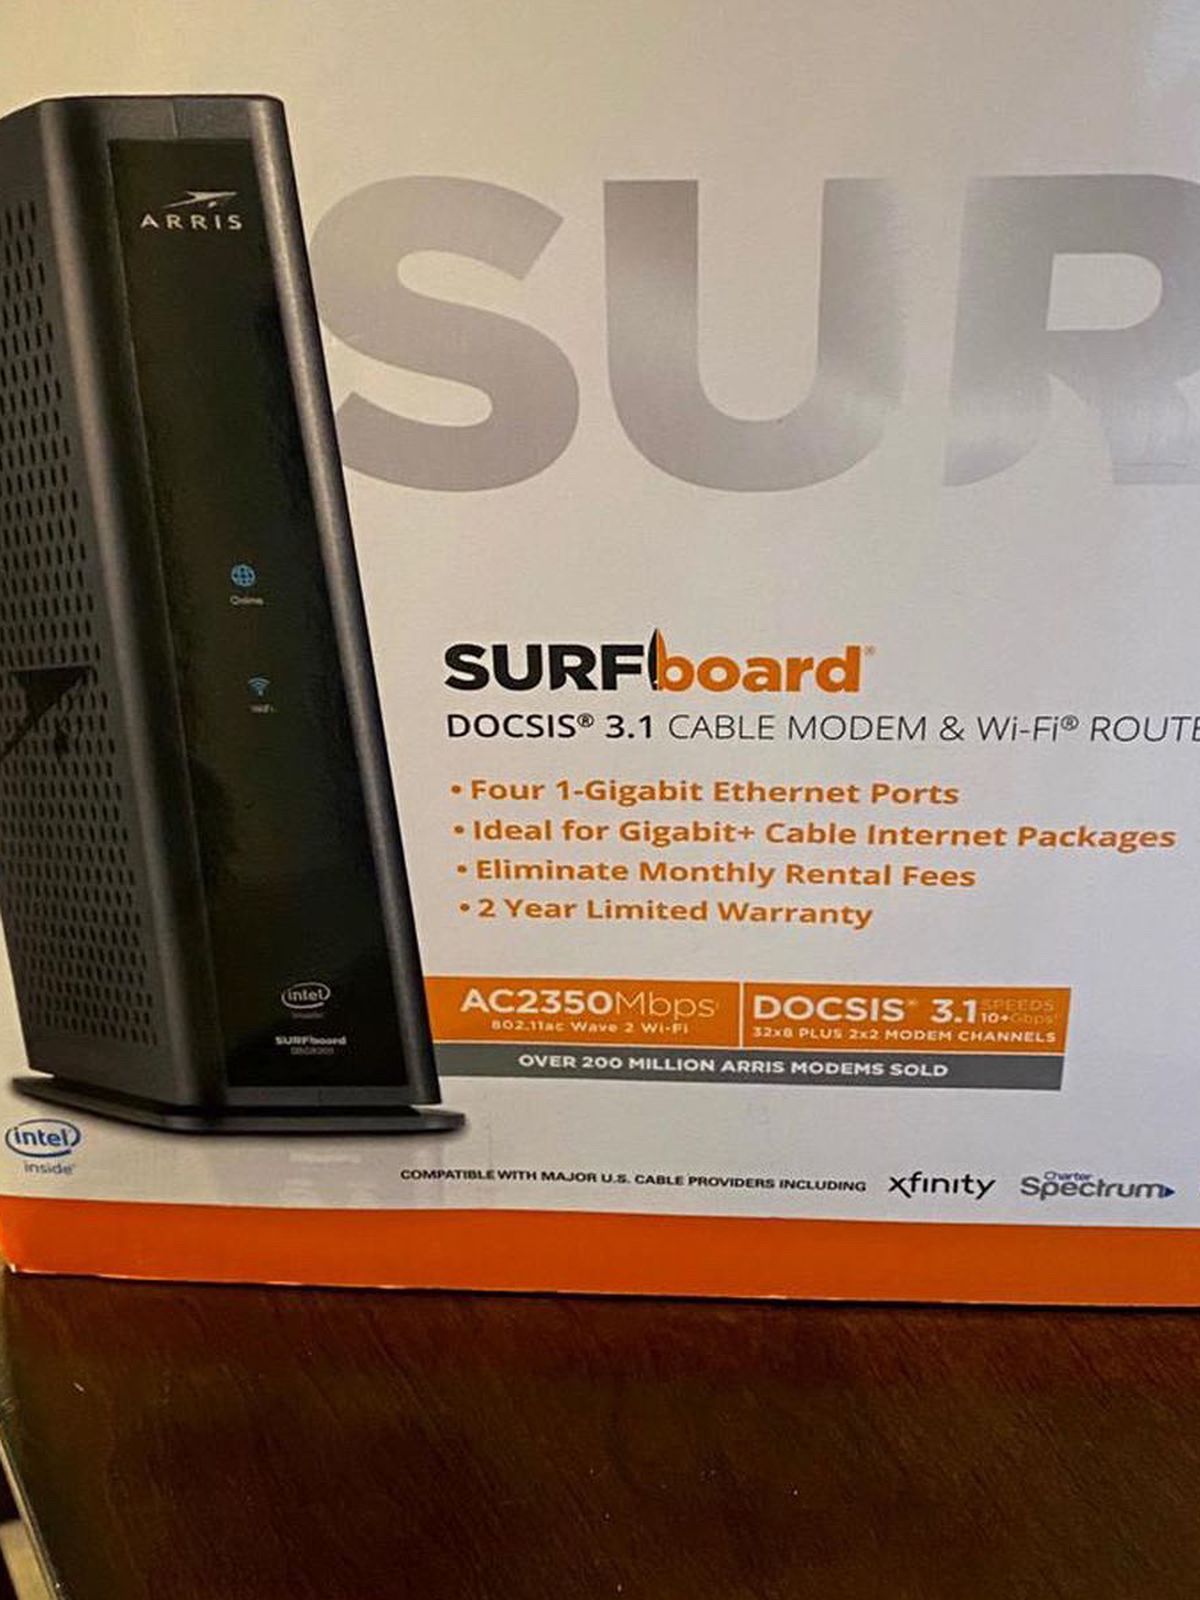 ARRIS Surfbord 3.1 Router WI-FI And Cable Modem Never Used